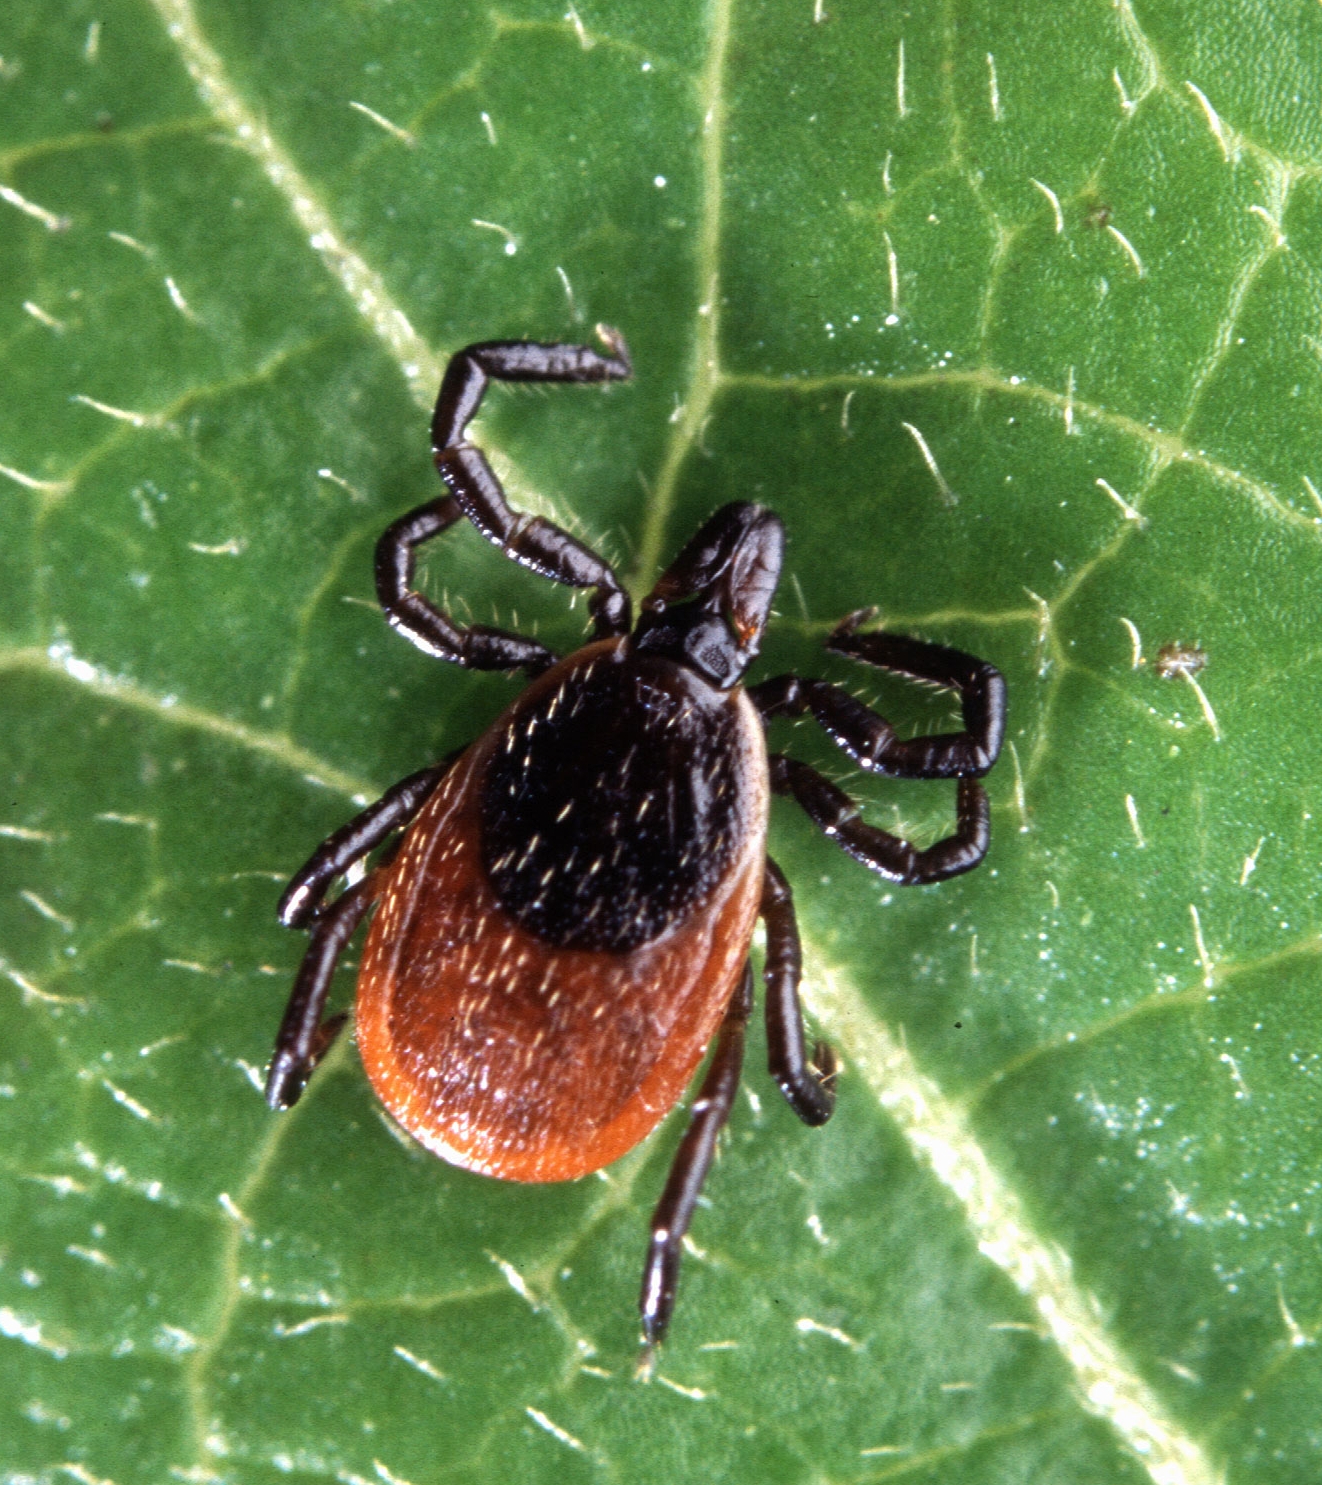 Nymphal and adult deer ticks can be carriers of Lyme disease. Nymphs are about the size of a poppy seed.